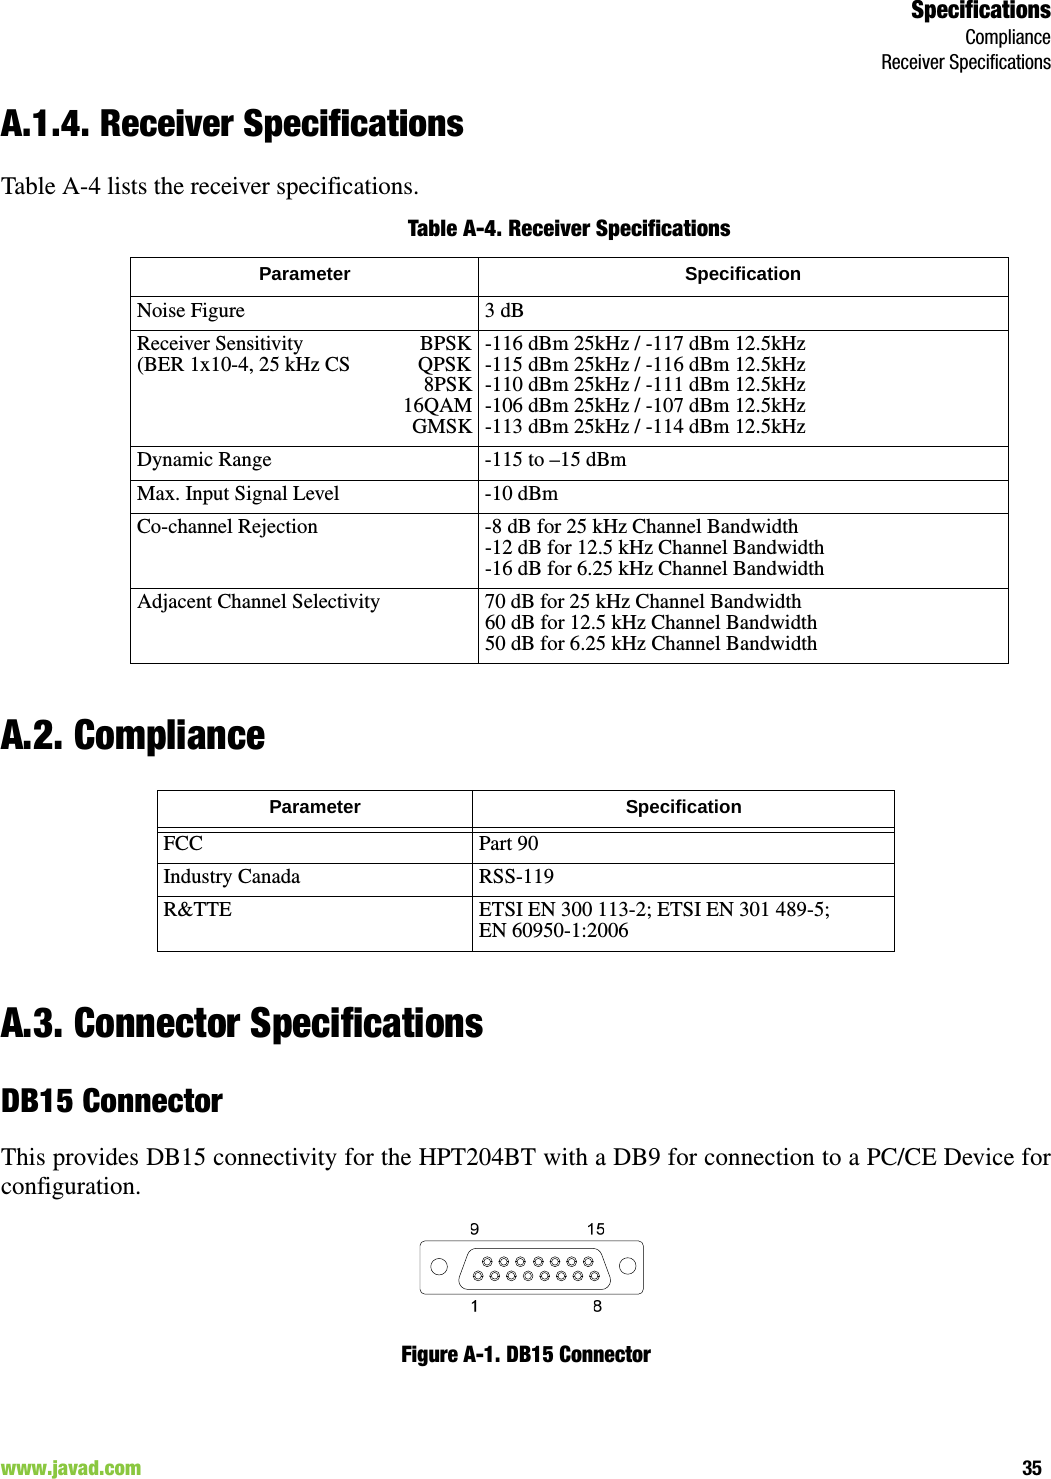 SpecificationsComplianceReceiver Specifications35www.javad.com                                                                                                                                                        A.1.4. Receiver SpecificationsTable A-4 lists the receiver specifications.Table A-4. Receiver SpecificationsA.2. ComplianceA.3. Connector SpecificationsDB15 ConnectorThis provides DB15 connectivity for the HPT204BT with a DB9 for connection to a PC/CE Device forconfiguration. Figure A-1. DB15 ConnectorParameter SpecificationNoise Figure 3 dBReceiver Sensitivity                       BPSK(BER 1x10-4, 25 kHz CS             QPSK                                               8PSK16QAMGMSK-116 dBm 25kHz / -117 dBm 12.5kHz-115 dBm 25kHz / -116 dBm 12.5kHz-110 dBm 25kHz / -111 dBm 12.5kHz-106 dBm 25kHz / -107 dBm 12.5kHz-113 dBm 25kHz / -114 dBm 12.5kHzDynamic Range -115 to –15 dBmMax. Input Signal Level -10 dBmCo-channel Rejection -8 dB for 25 kHz Channel Bandwidth-12 dB for 12.5 kHz Channel Bandwidth-16 dB for 6.25 kHz Channel BandwidthAdjacent Channel Selectivity 70 dB for 25 kHz Channel Bandwidth60 dB for 12.5 kHz Channel Bandwidth50 dB for 6.25 kHz Channel BandwidthParameter SpecificationFCC Part 90 Industry Canada RSS-119R&amp;TTE ETSI EN 300 113-2; ETSI EN 301 489-5; EN 60950-1:2006